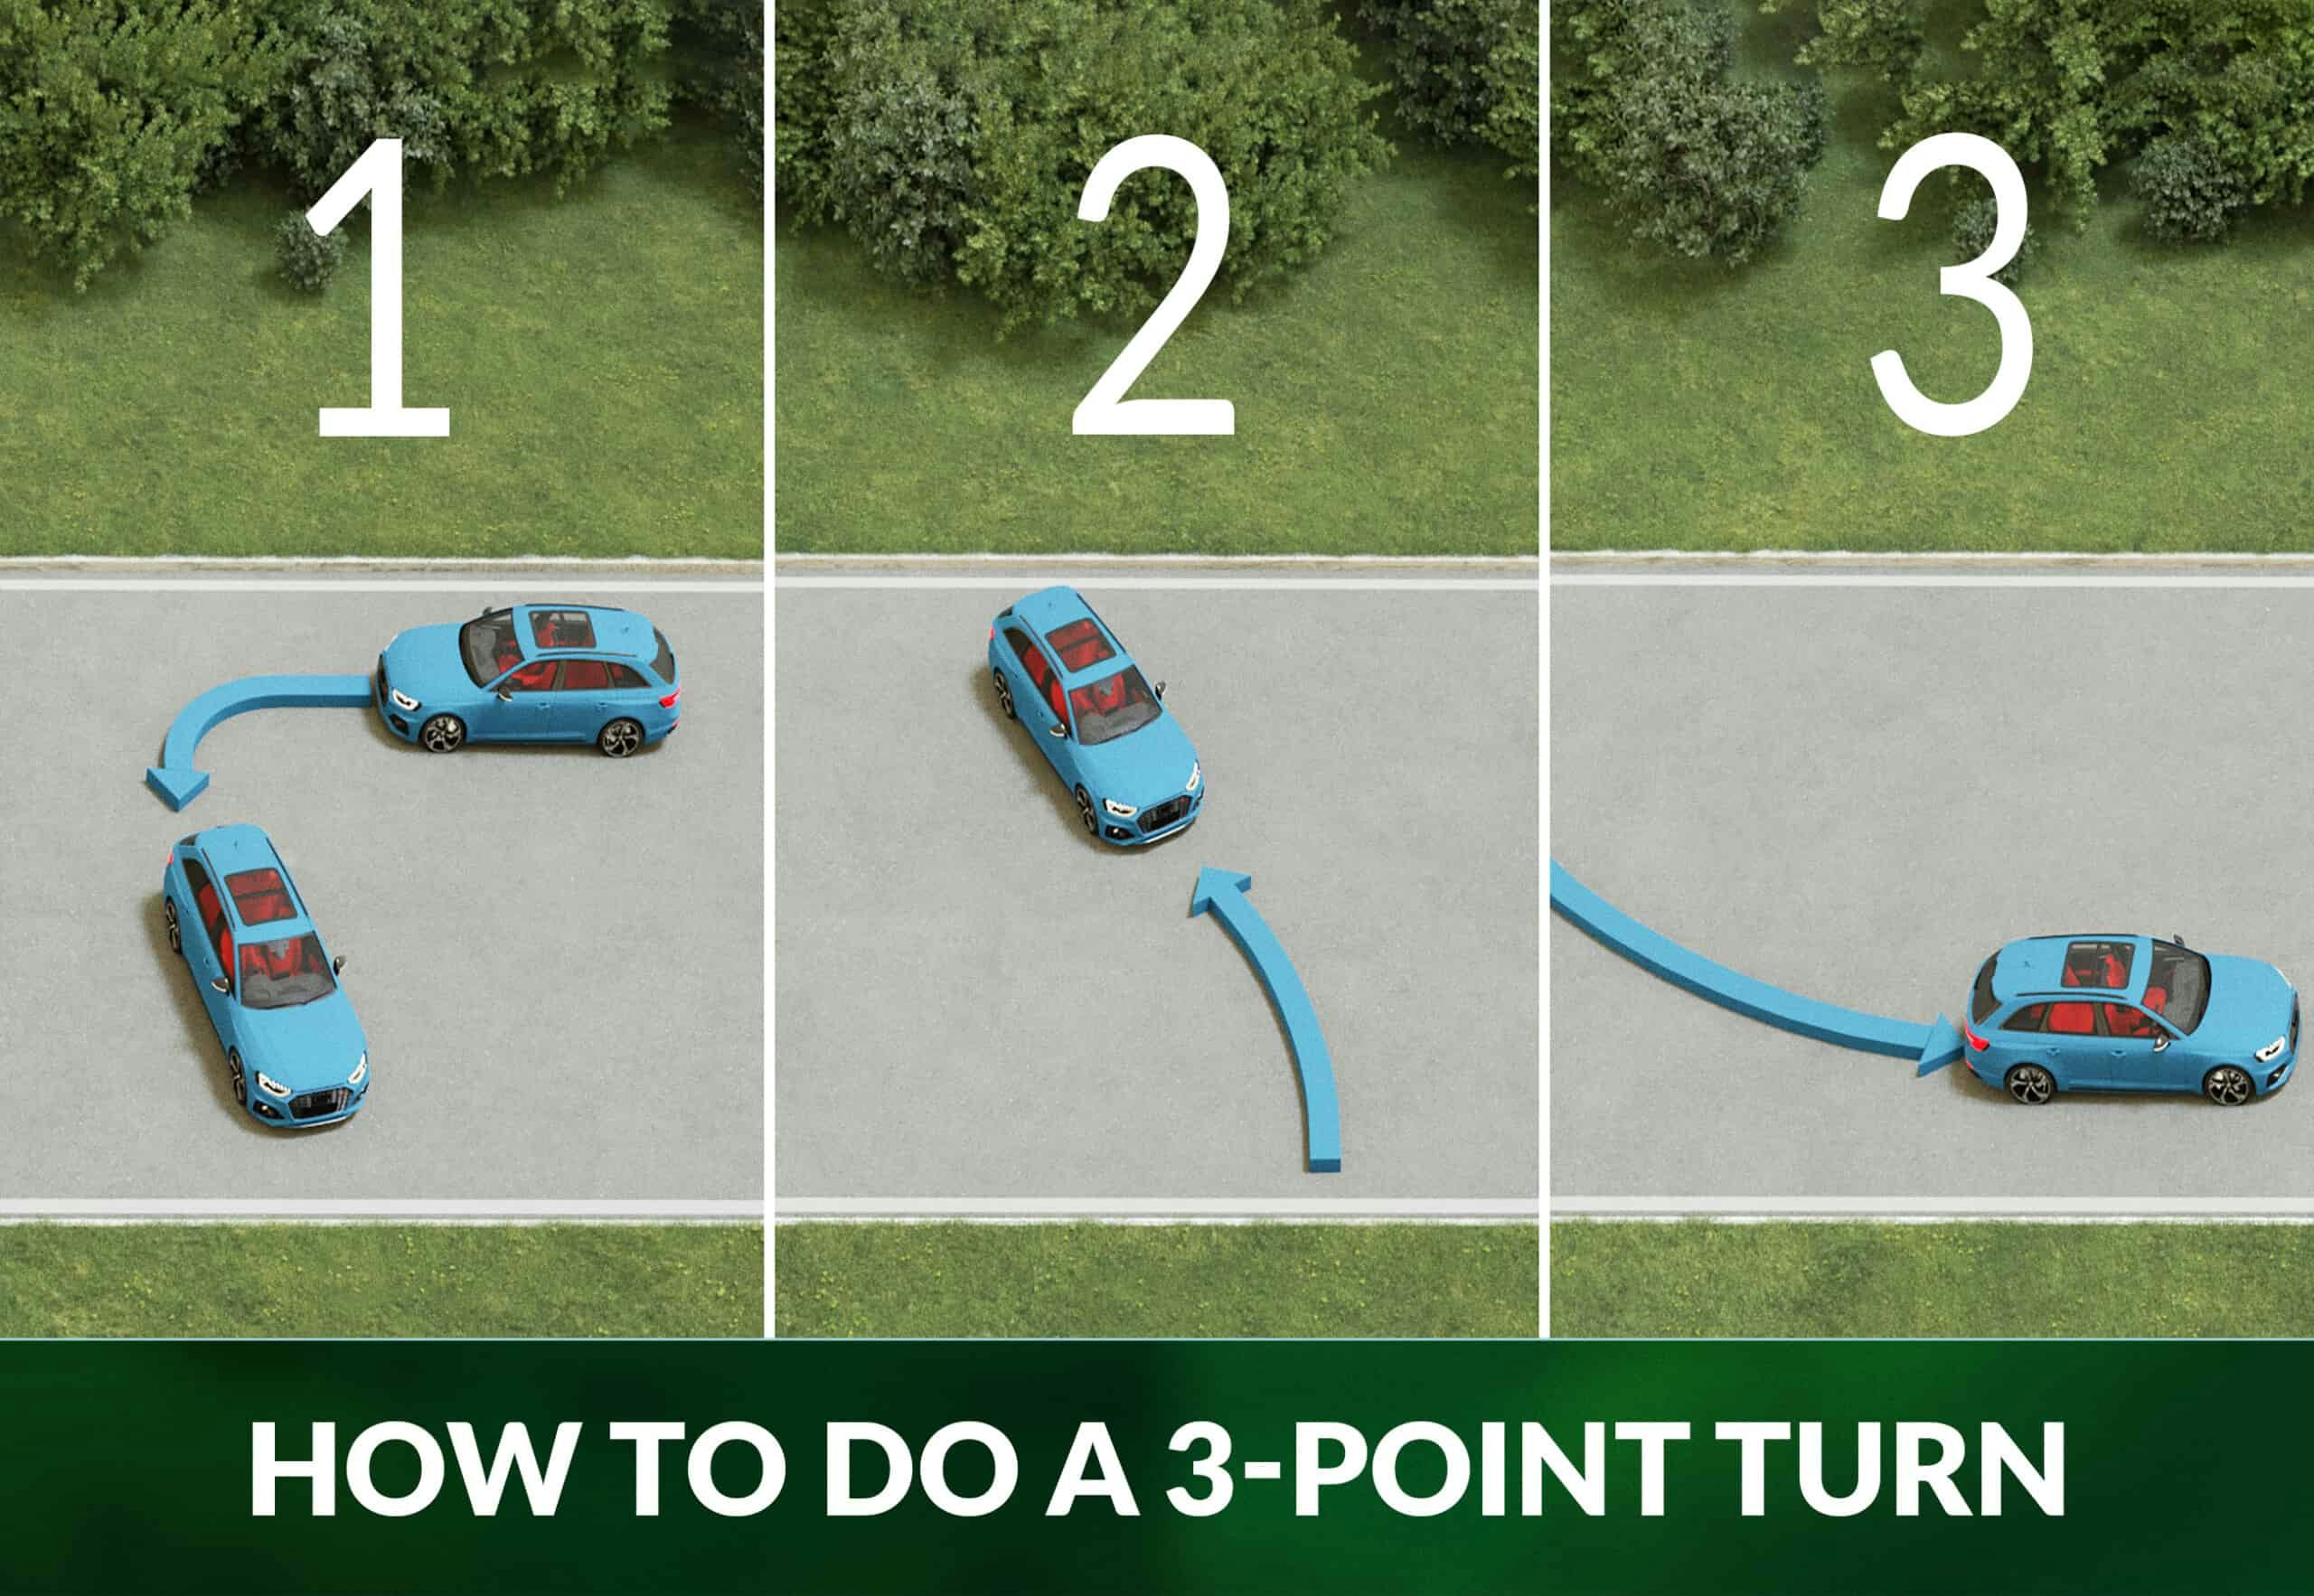 How To Turn On Car How to Do a 3 Point Turn (Step-by-Step) | Zutobi Drivers Ed